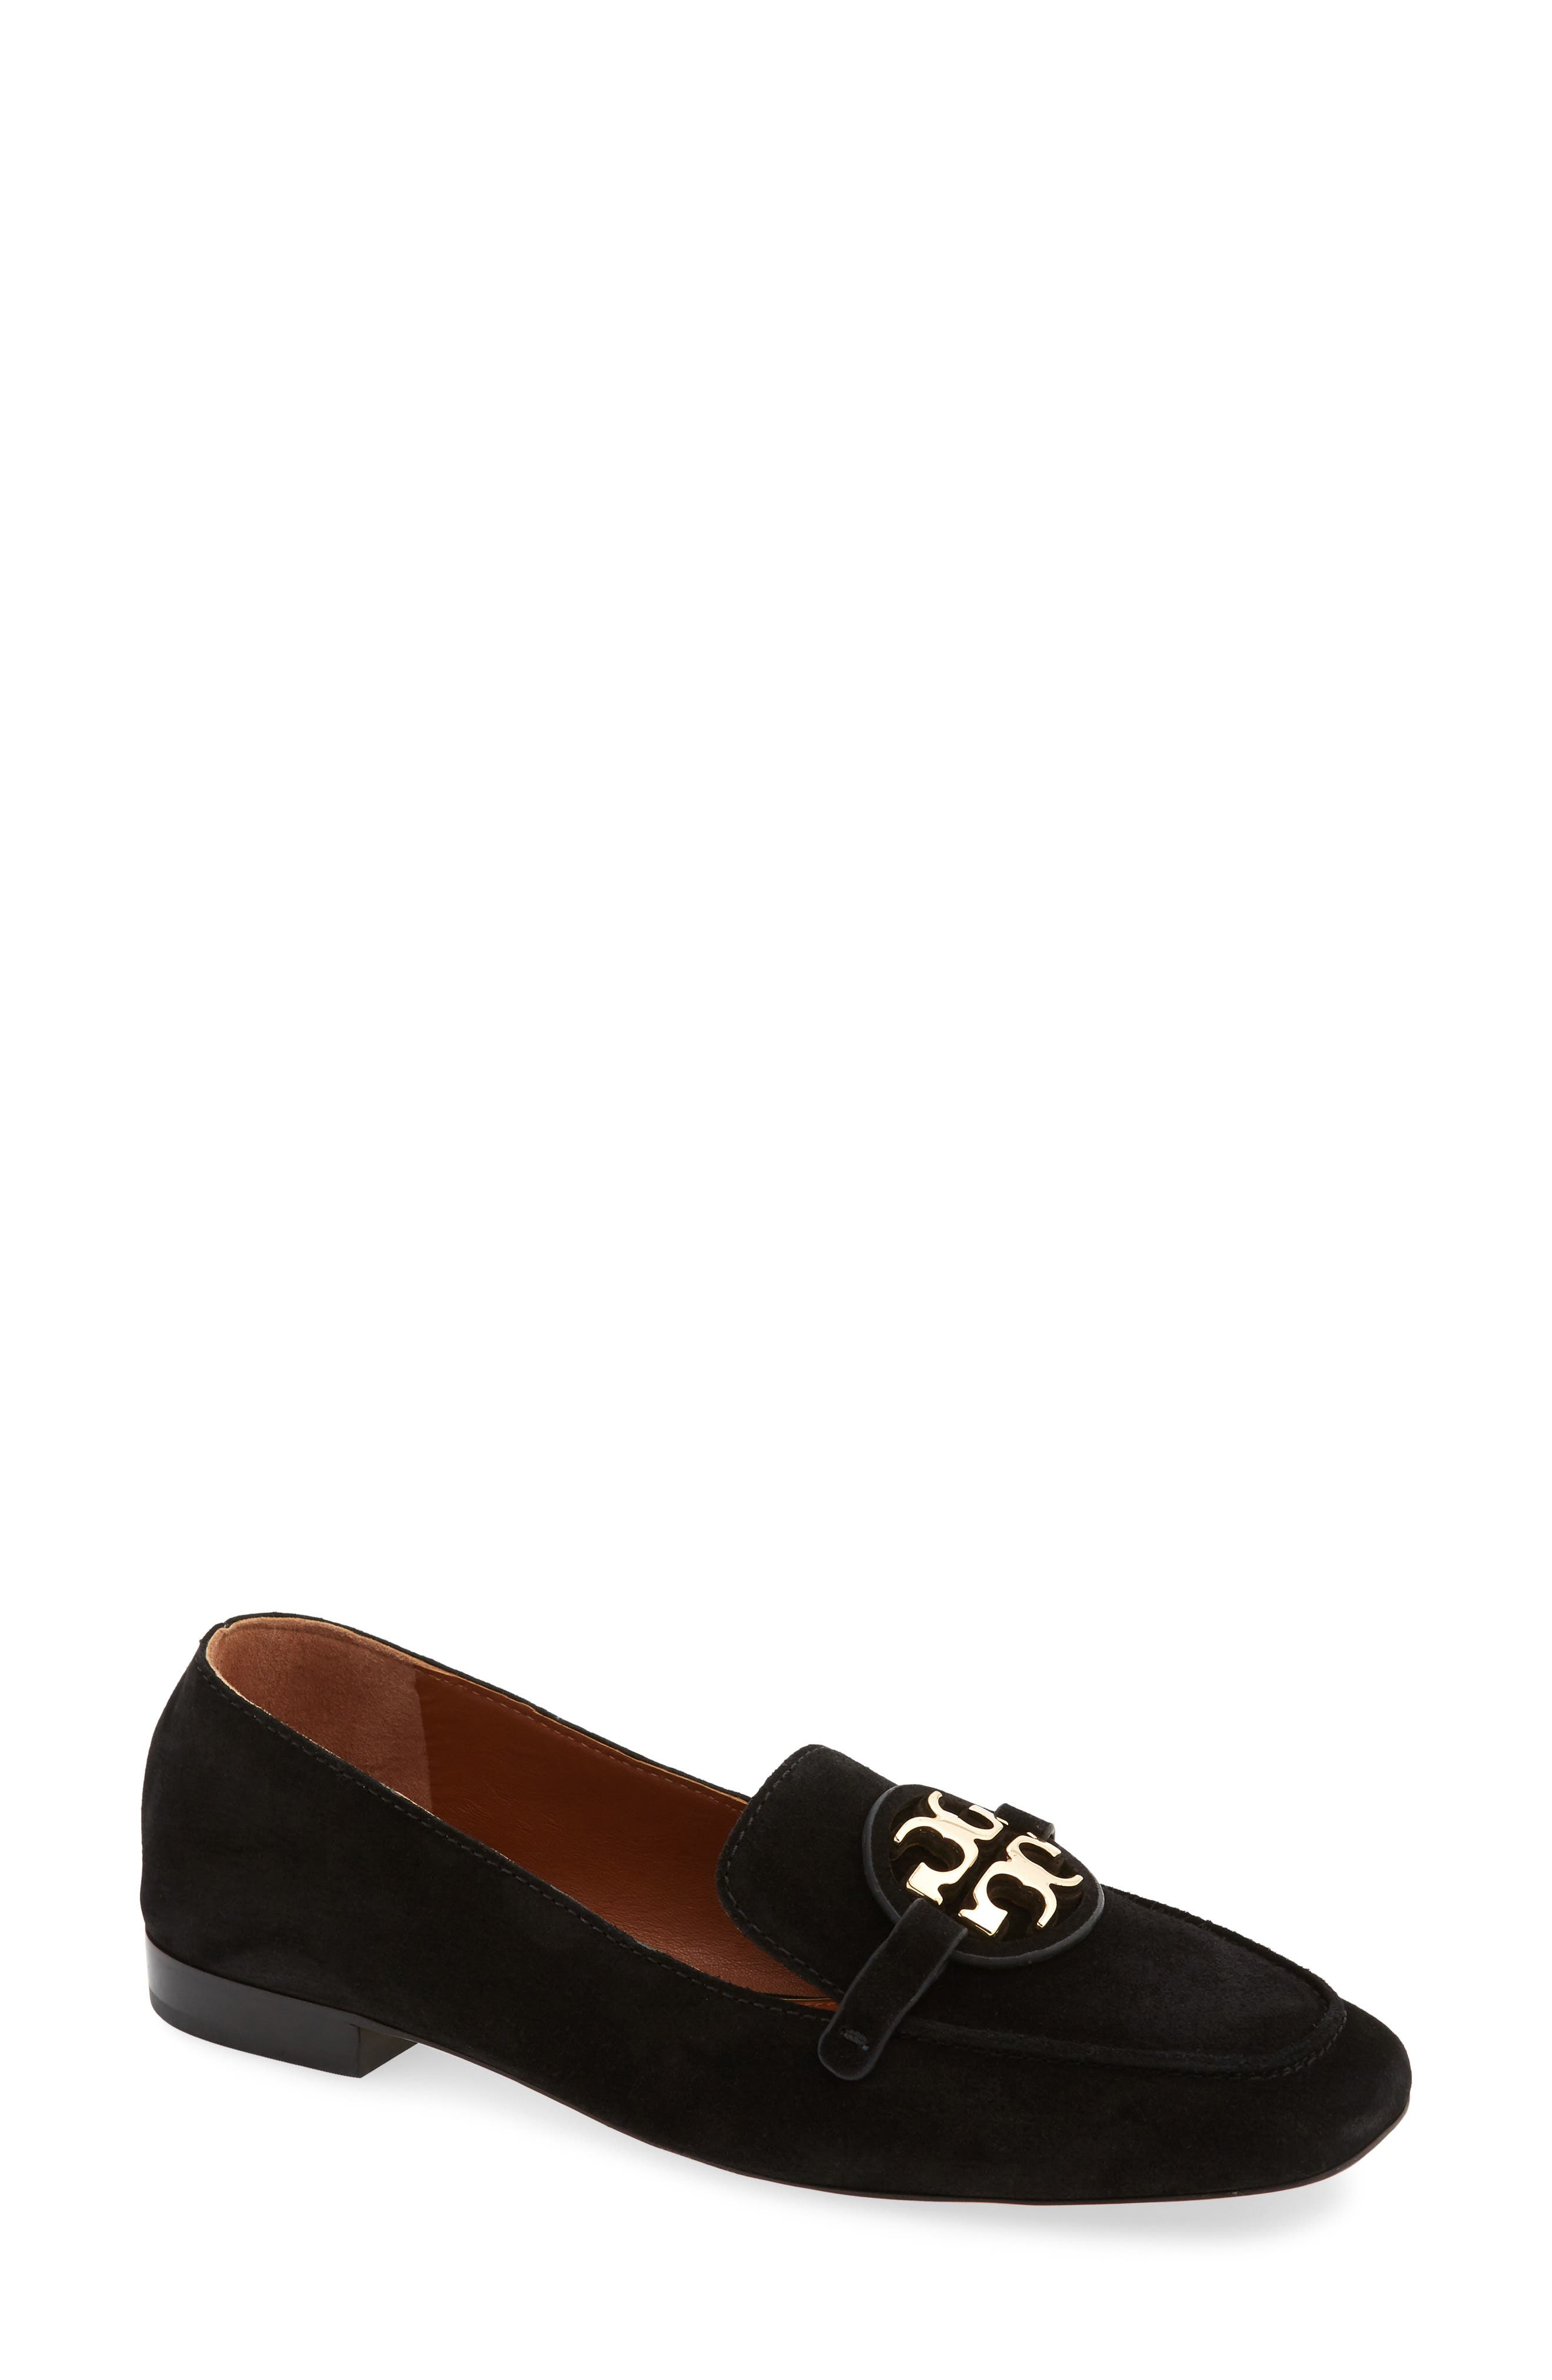 tory burch oxford shoes